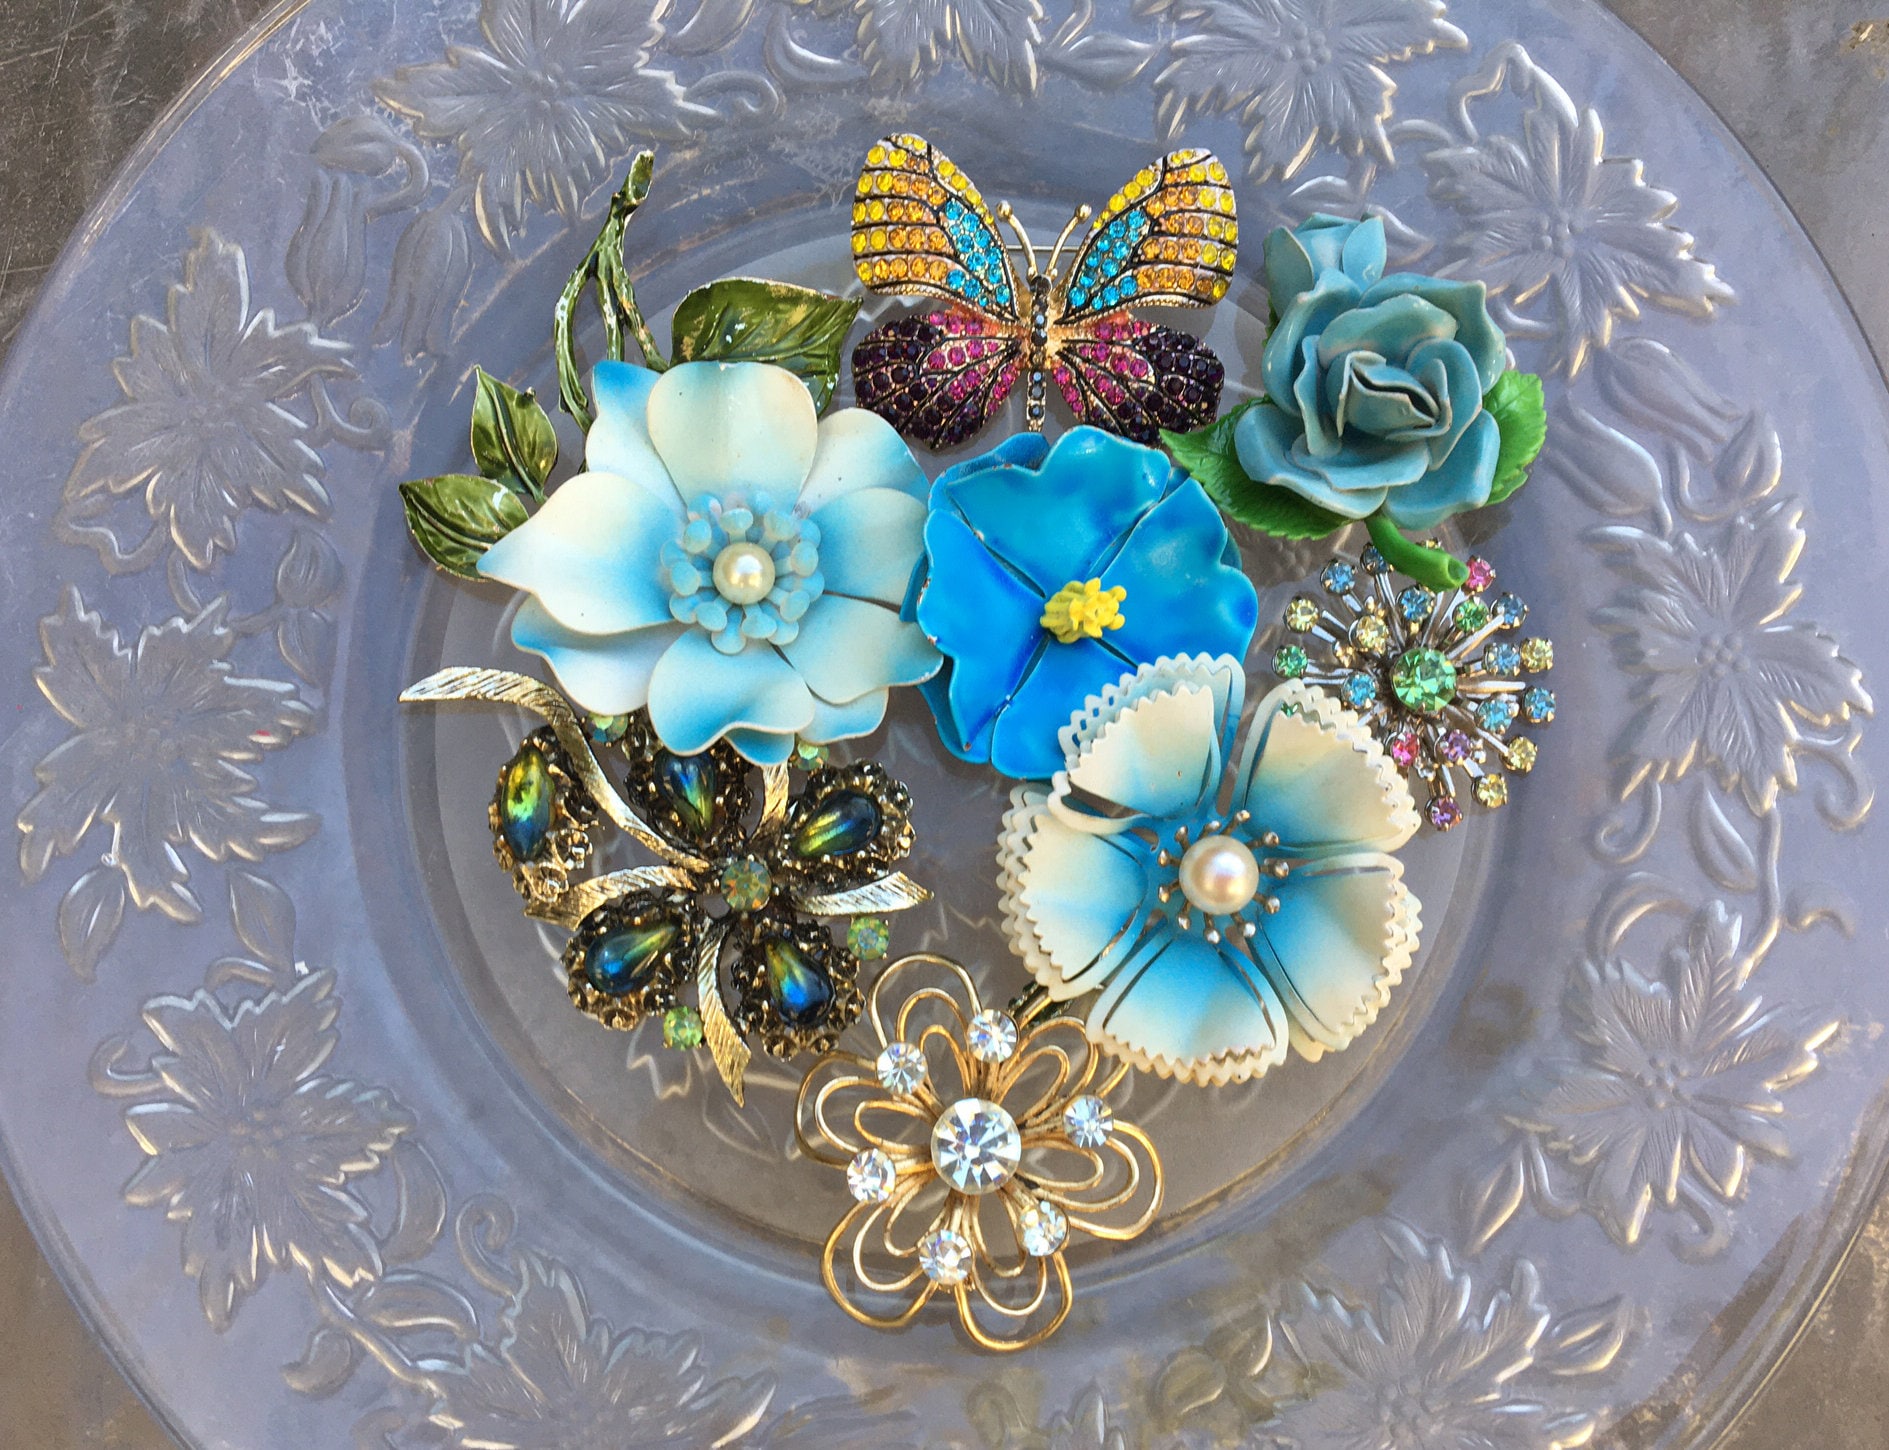 Aqua Open Flower Brooch with Aqua Blue and Green Rhinestones in The Center of Lovely Curled Petals Lined with Clear Rhinestones